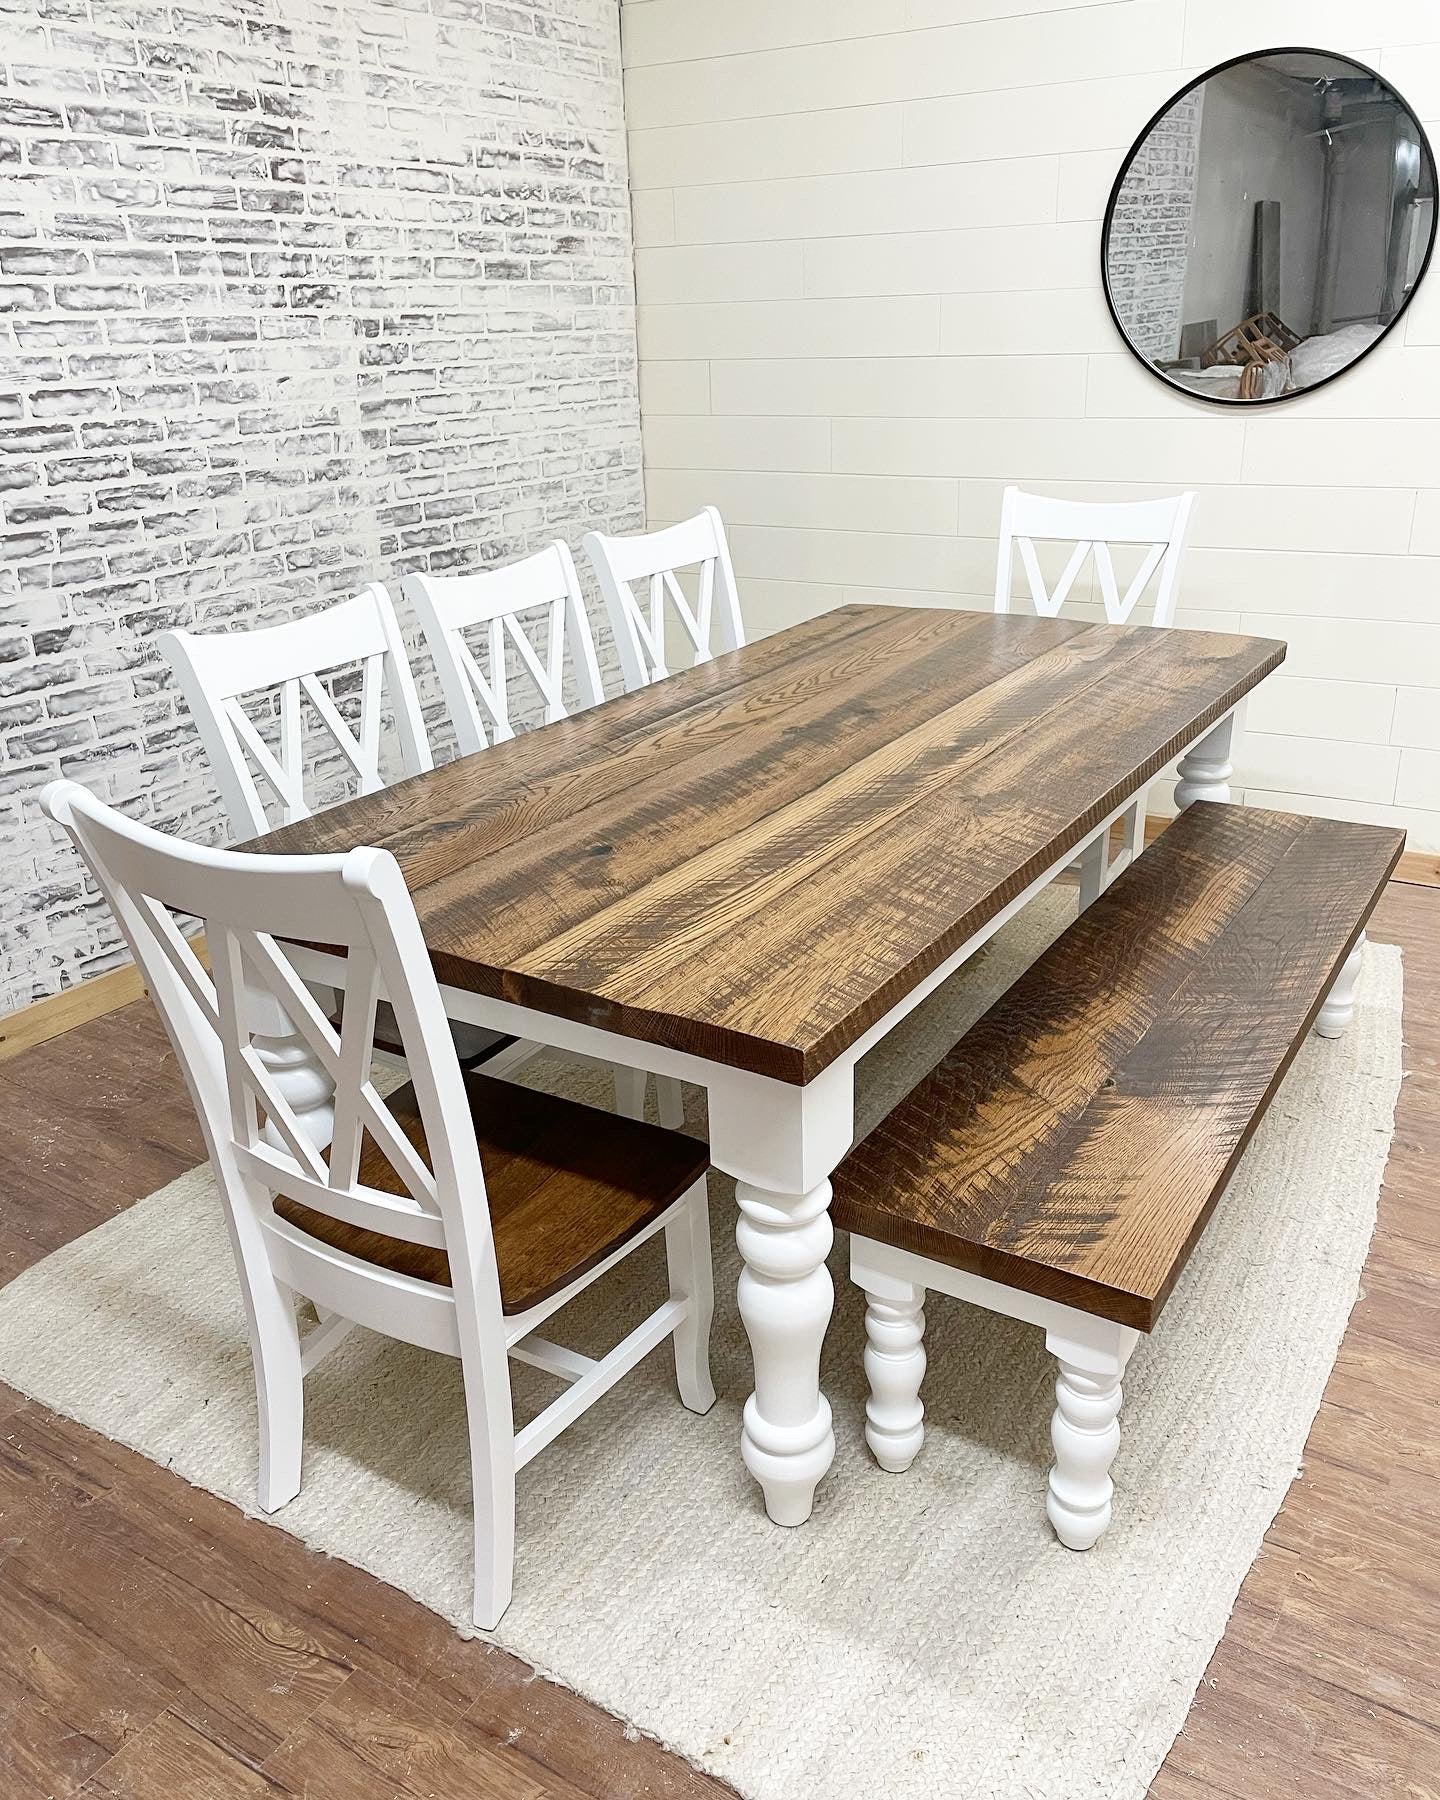 Pictured with an 8' L x 42" Rustic White Oak top stained Early American and a painted white base. Pictured with a Matching Bench and 5 Double Cross Back Chairs.